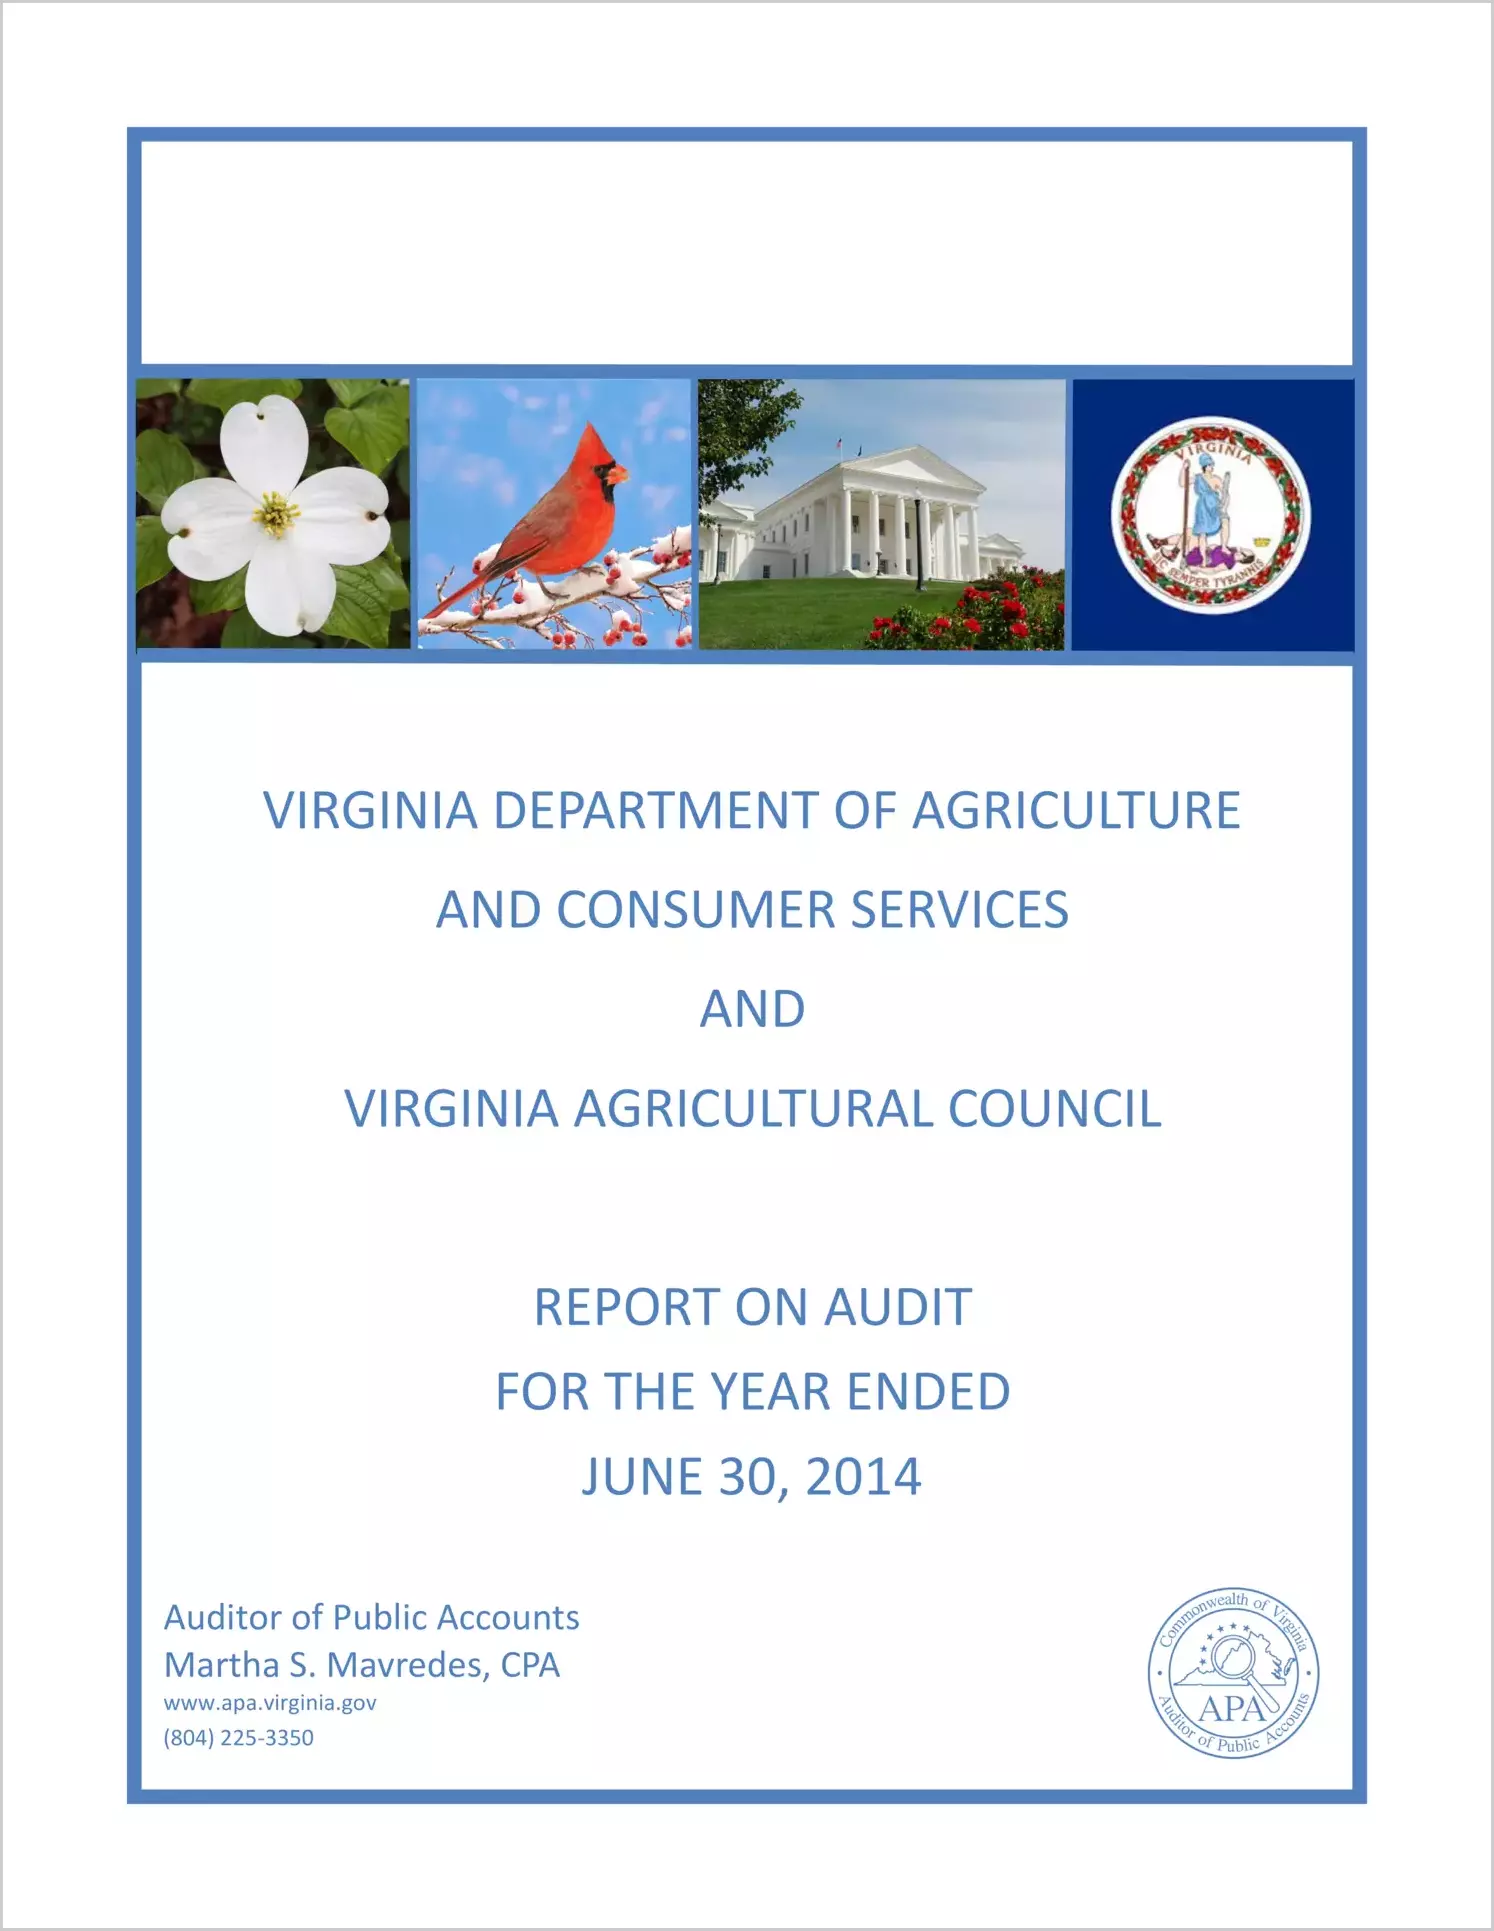 Virginia Department of Agriculture and Consumer Services and Virginia Agricultural Council for the fiscal year ended June 30, 2014